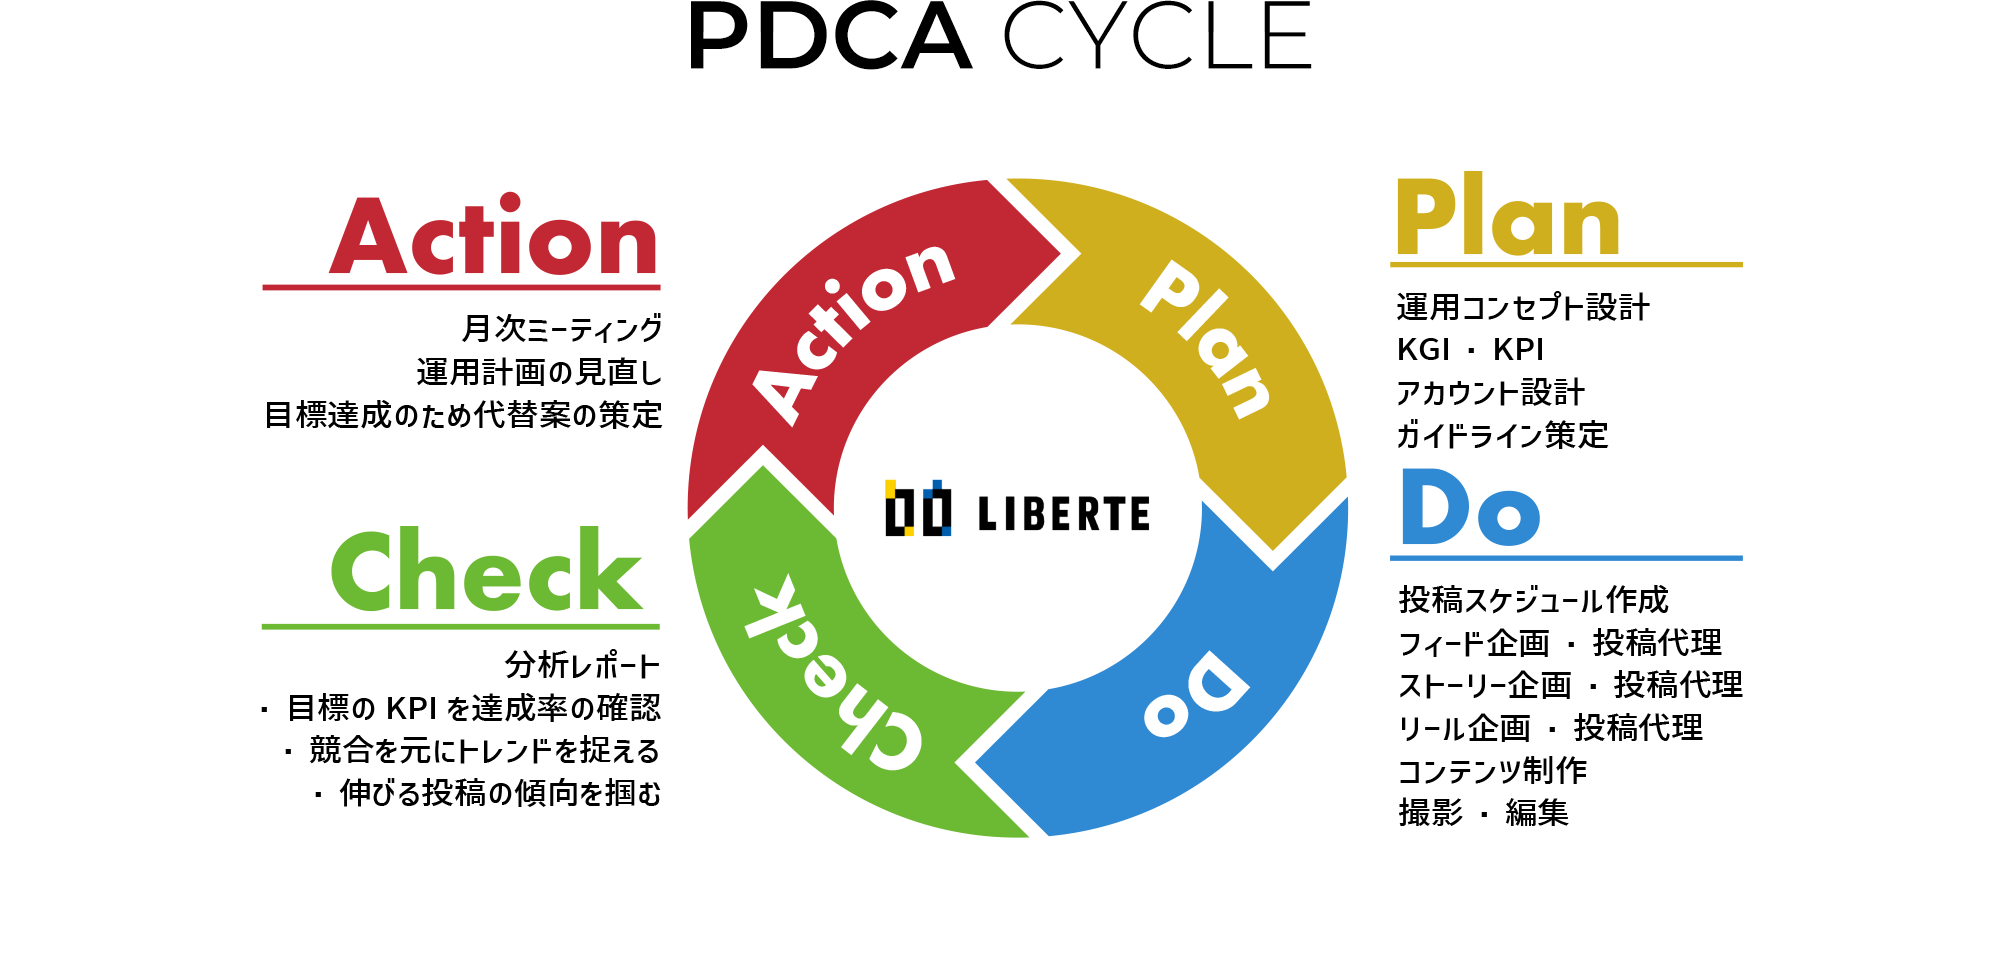 PDCA CYCLE